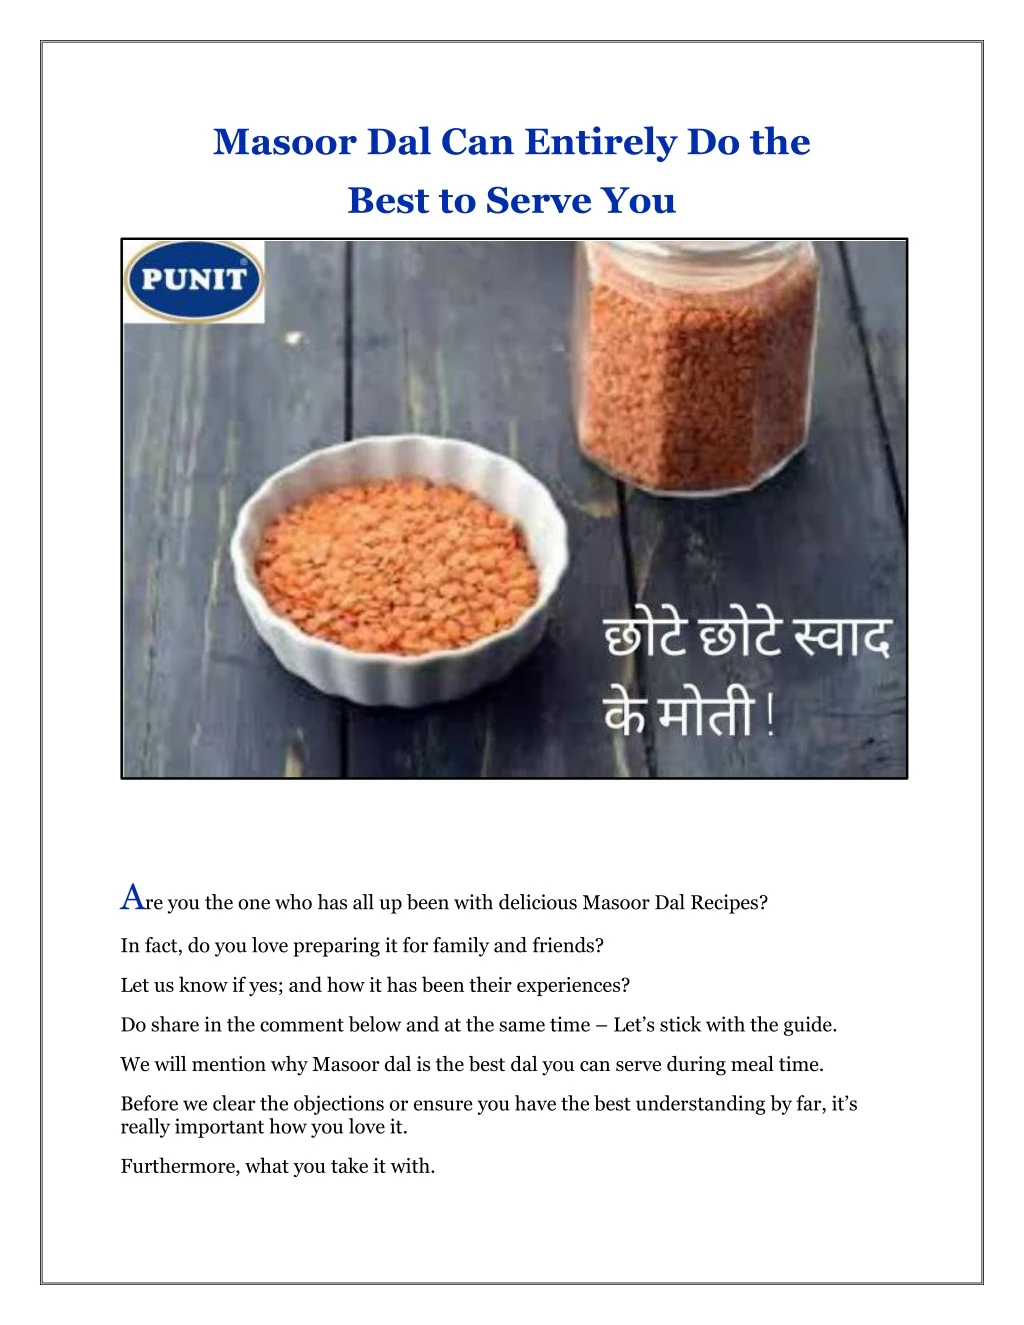 masoor dal can entirely do the best to serve you